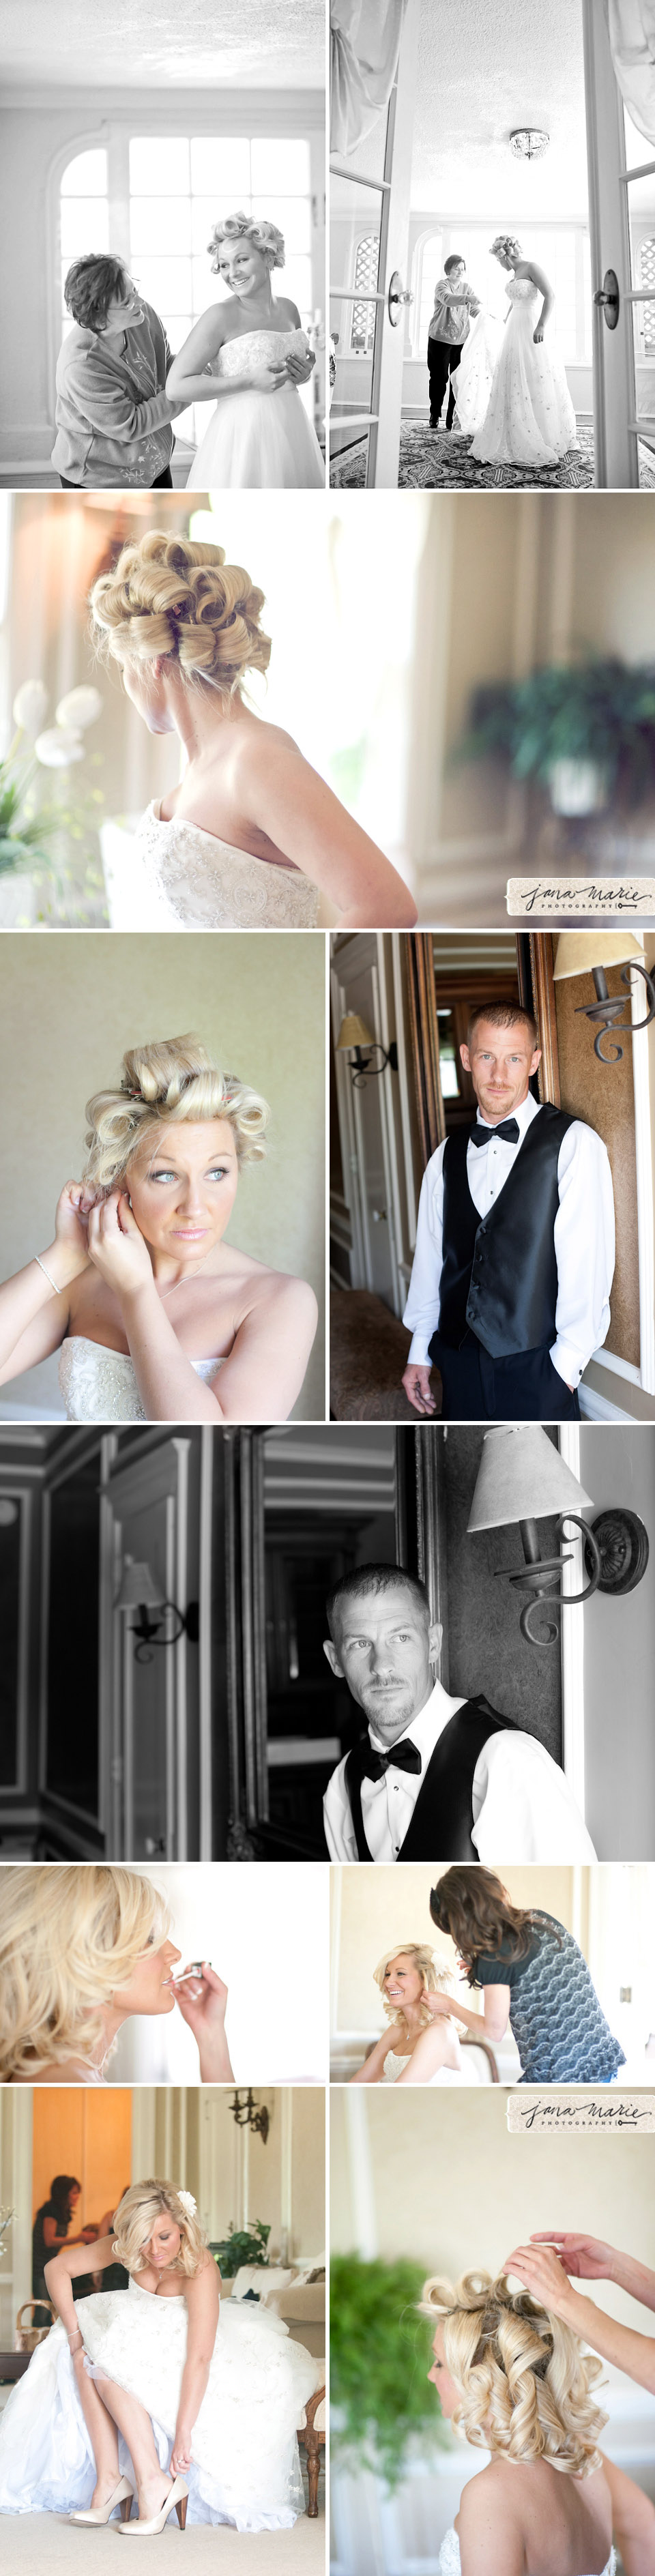 Getting ready, Jana Marie Photography, Longview Farms, groom, bridal suite, curls, outdoor wedding,